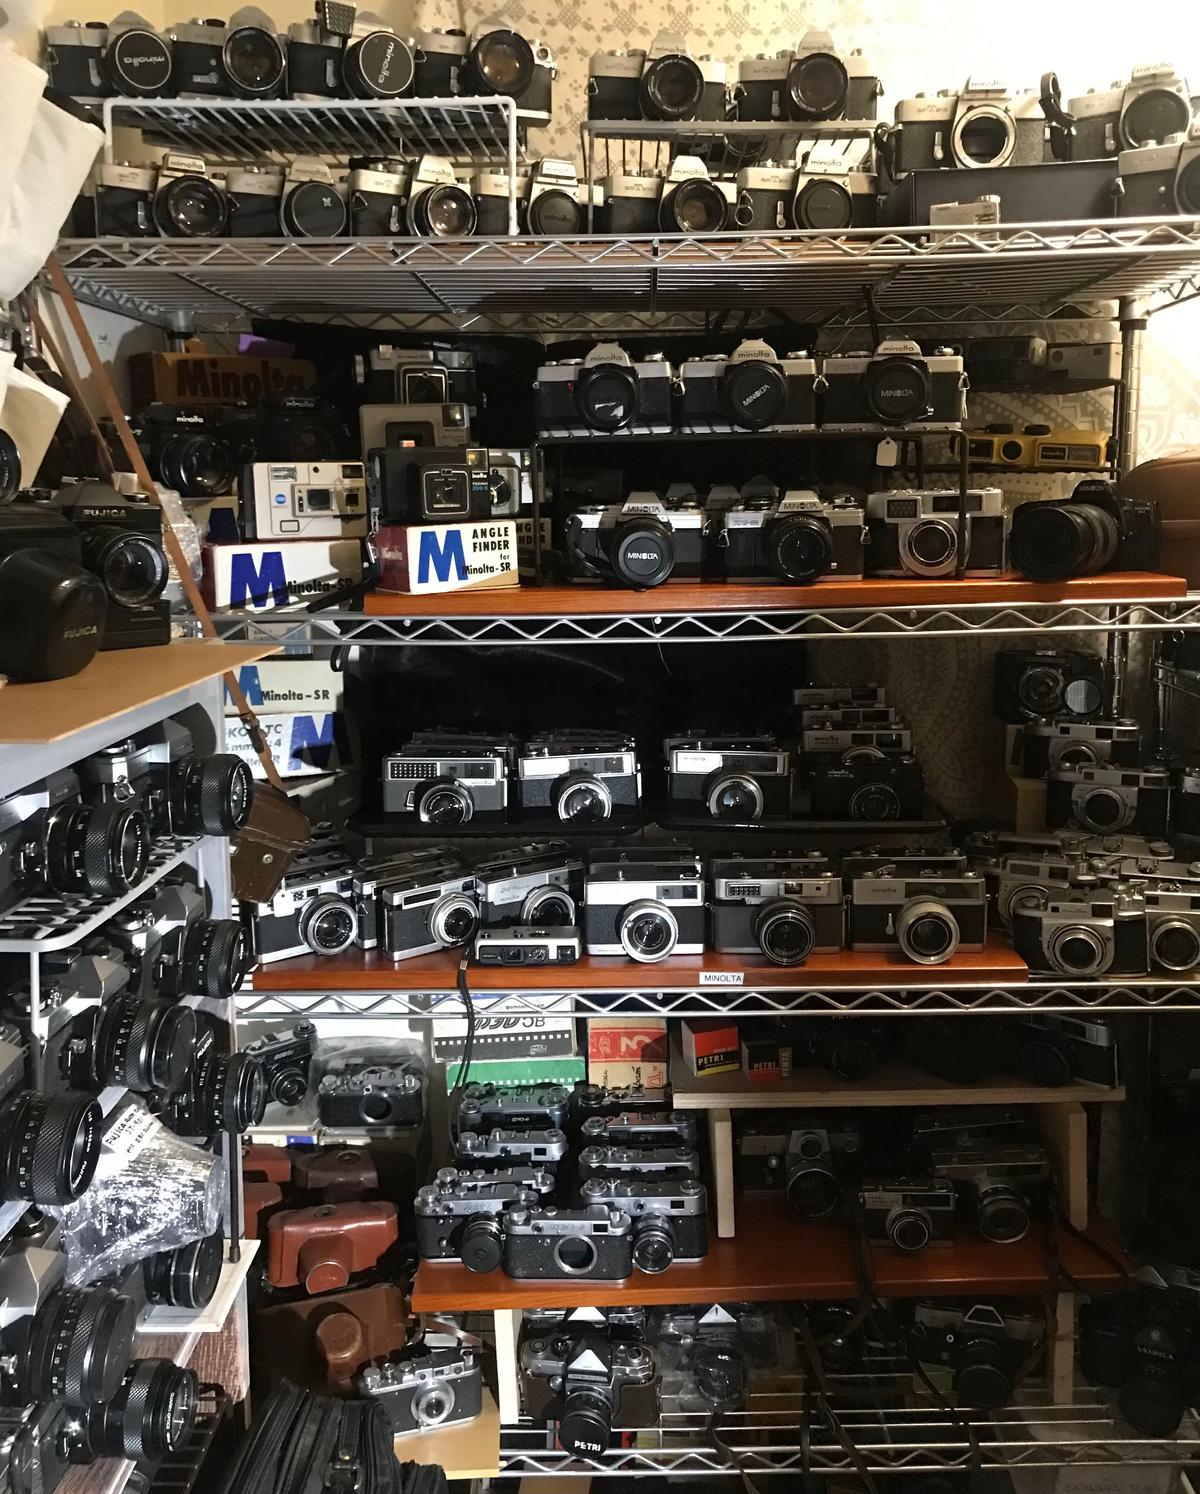 A storage space in their apartment containing cameras. (Courtesy of Fridrik)